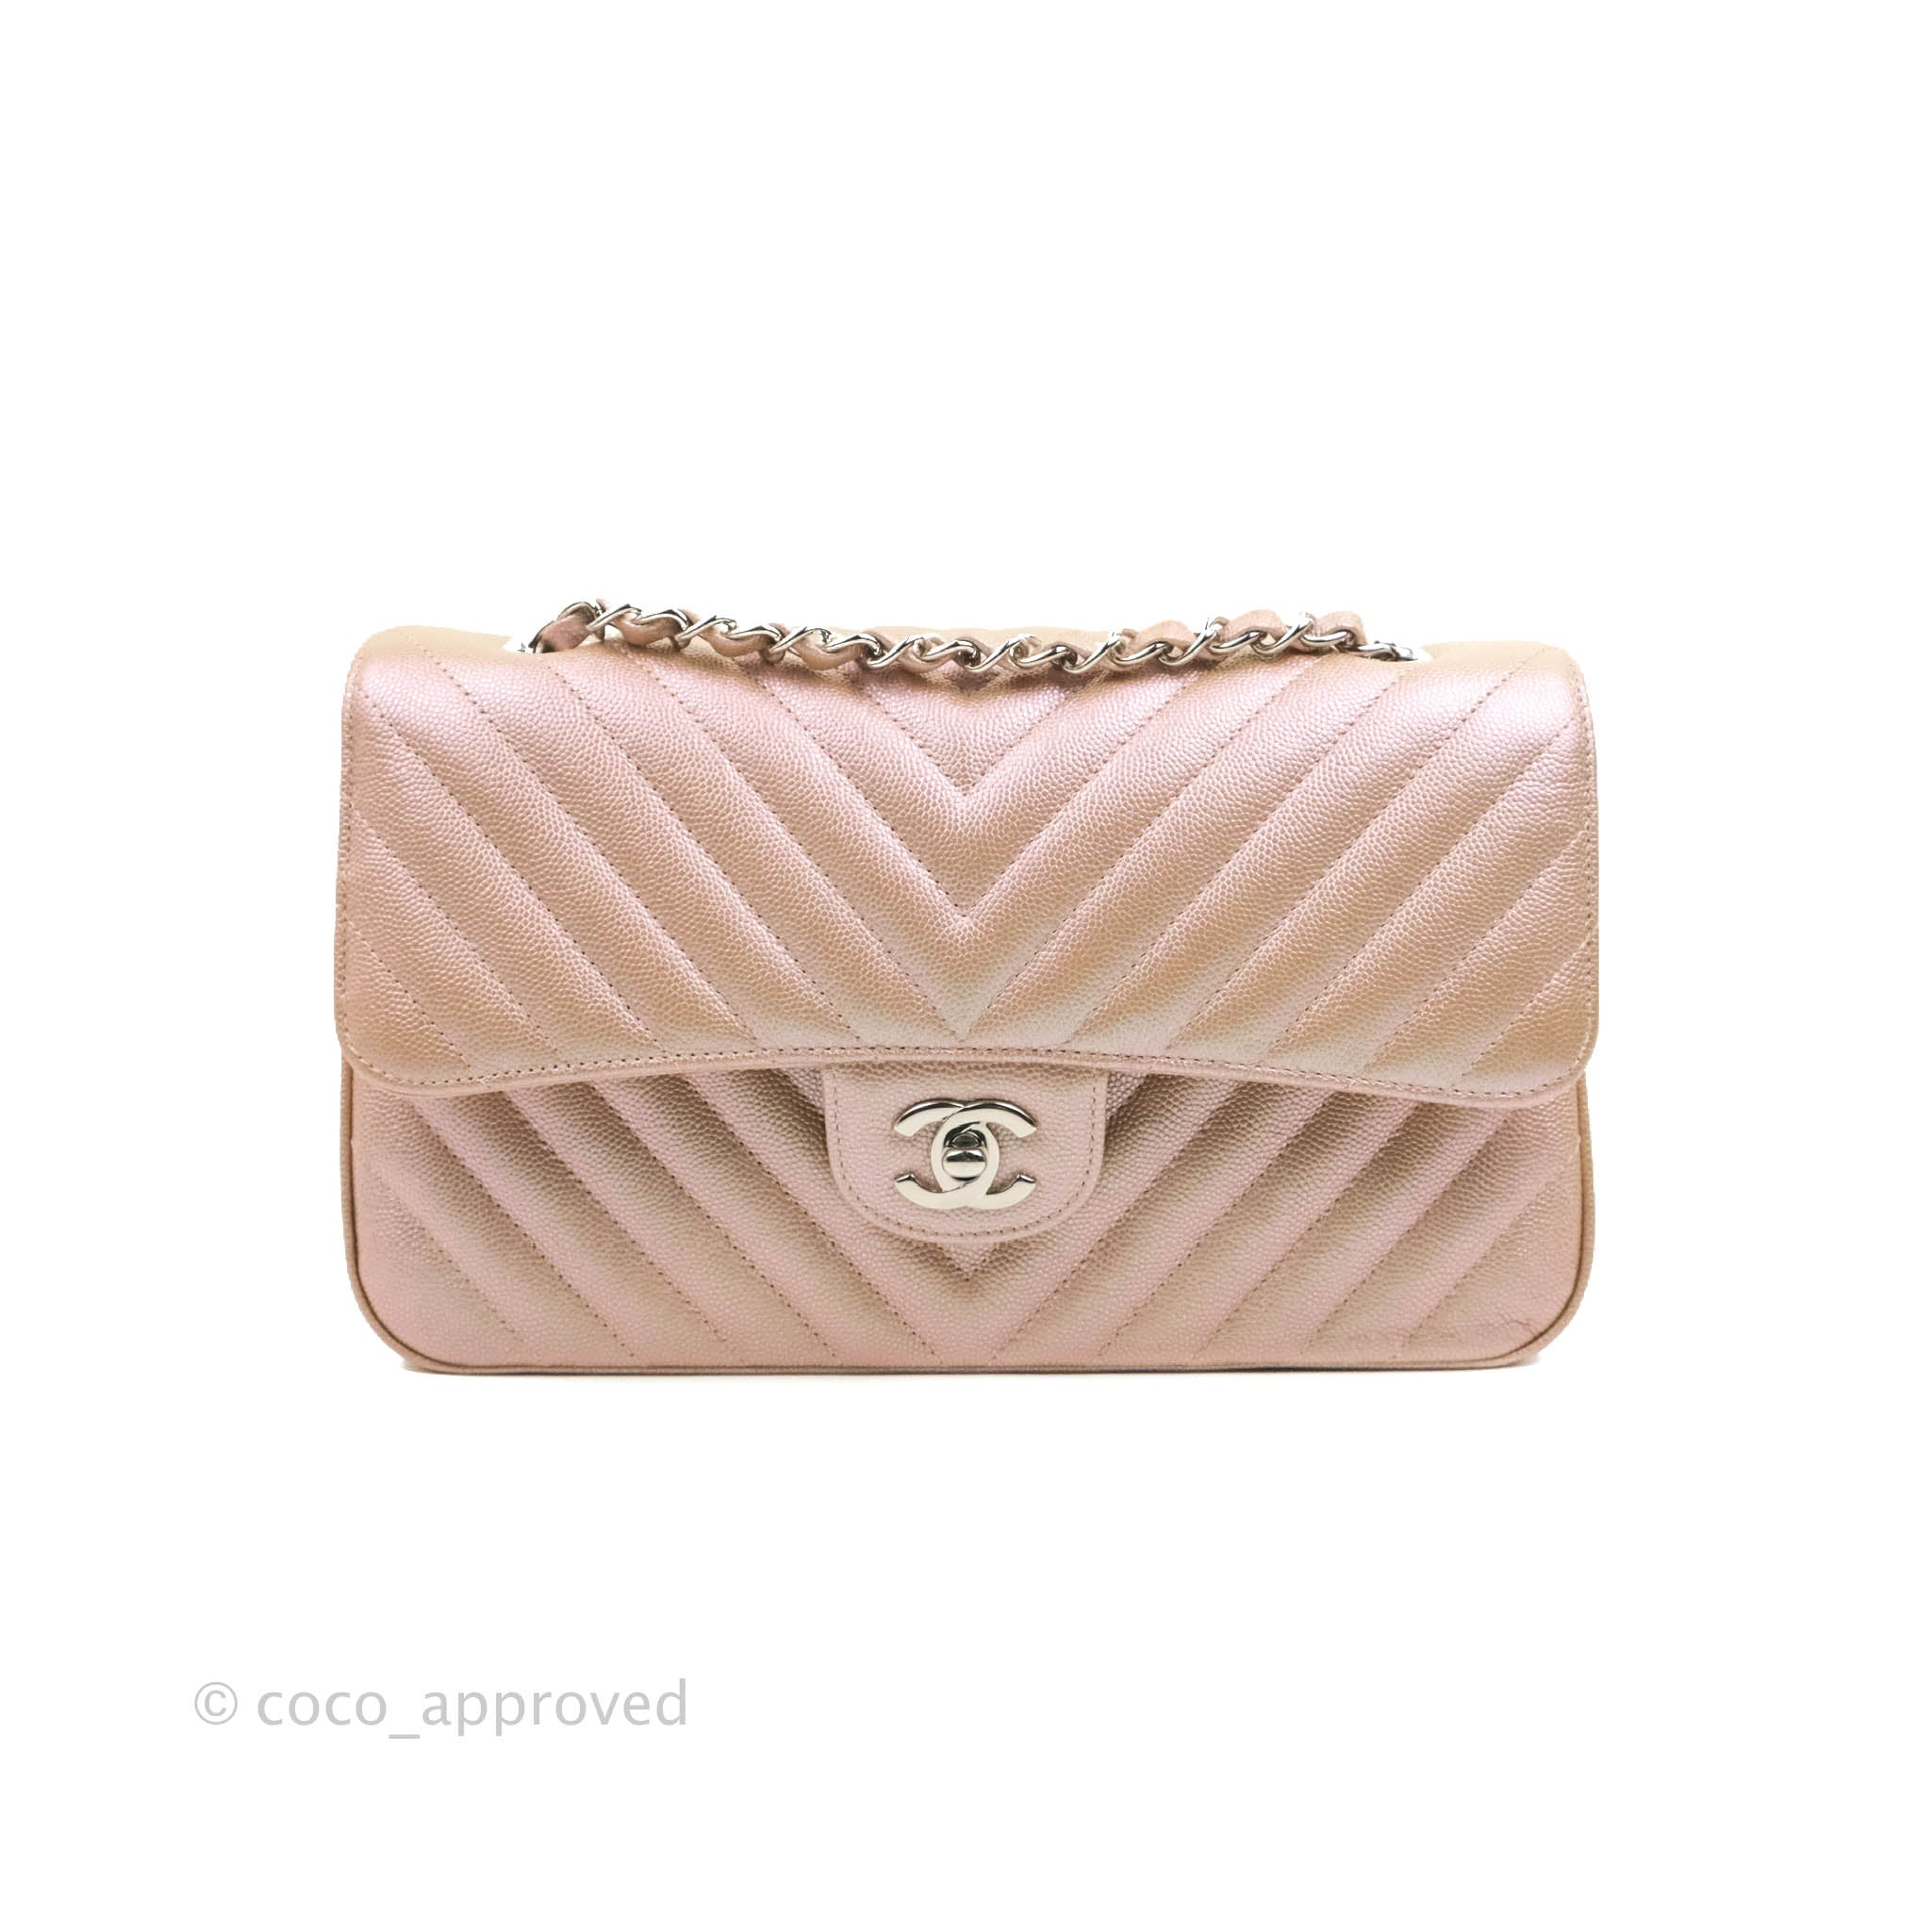 Time to shine: Chanel 17B Rose Gold - VLuxeStyle